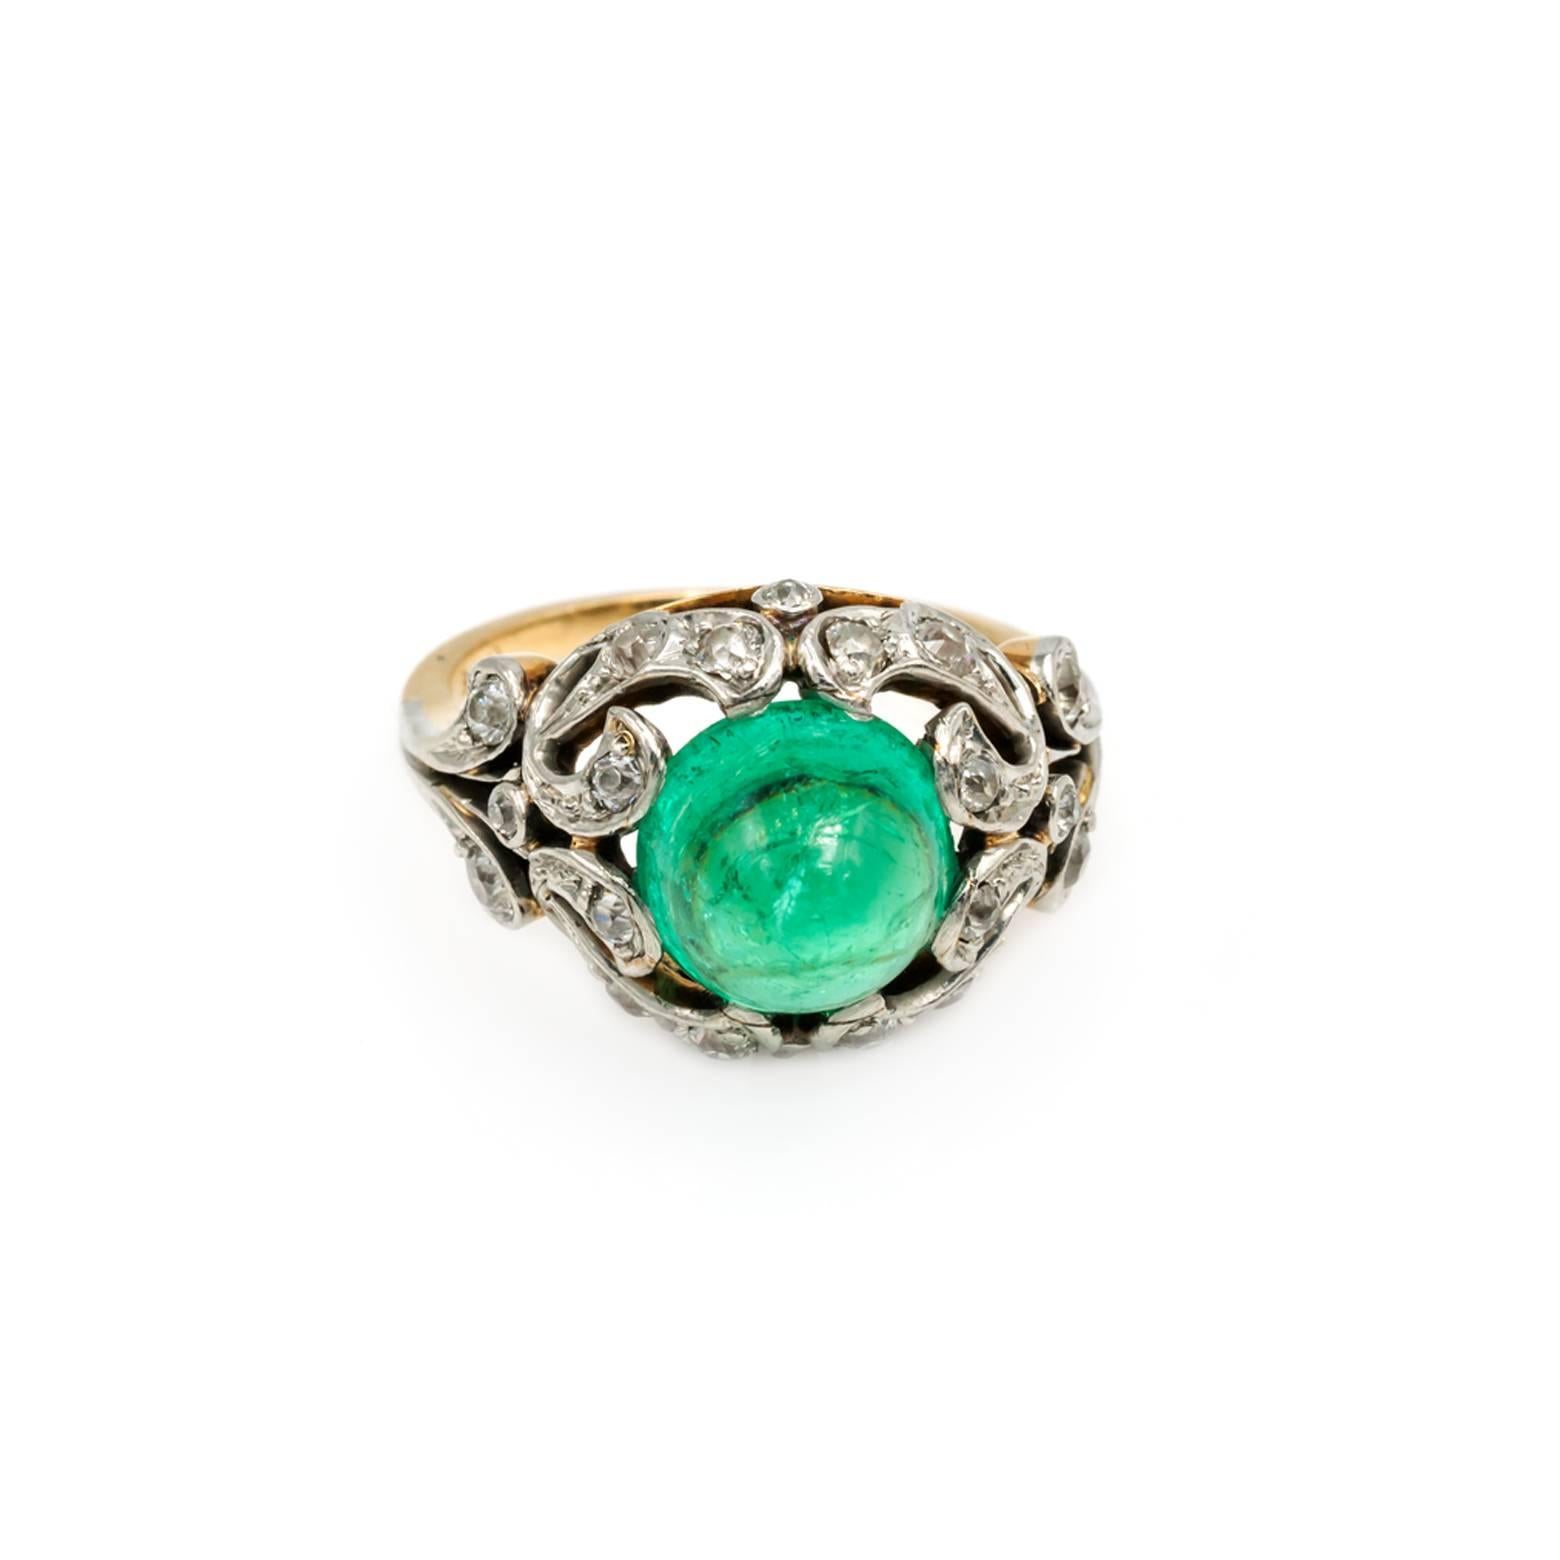 This stunning antique Edwardian ring is decorated with diamonds in a filigree fashion around the central mint green emerald cabochon. The old mine cut diamonds are set in platinum and the band is a rosy 14K yellow gold. Approximately 3 carats of